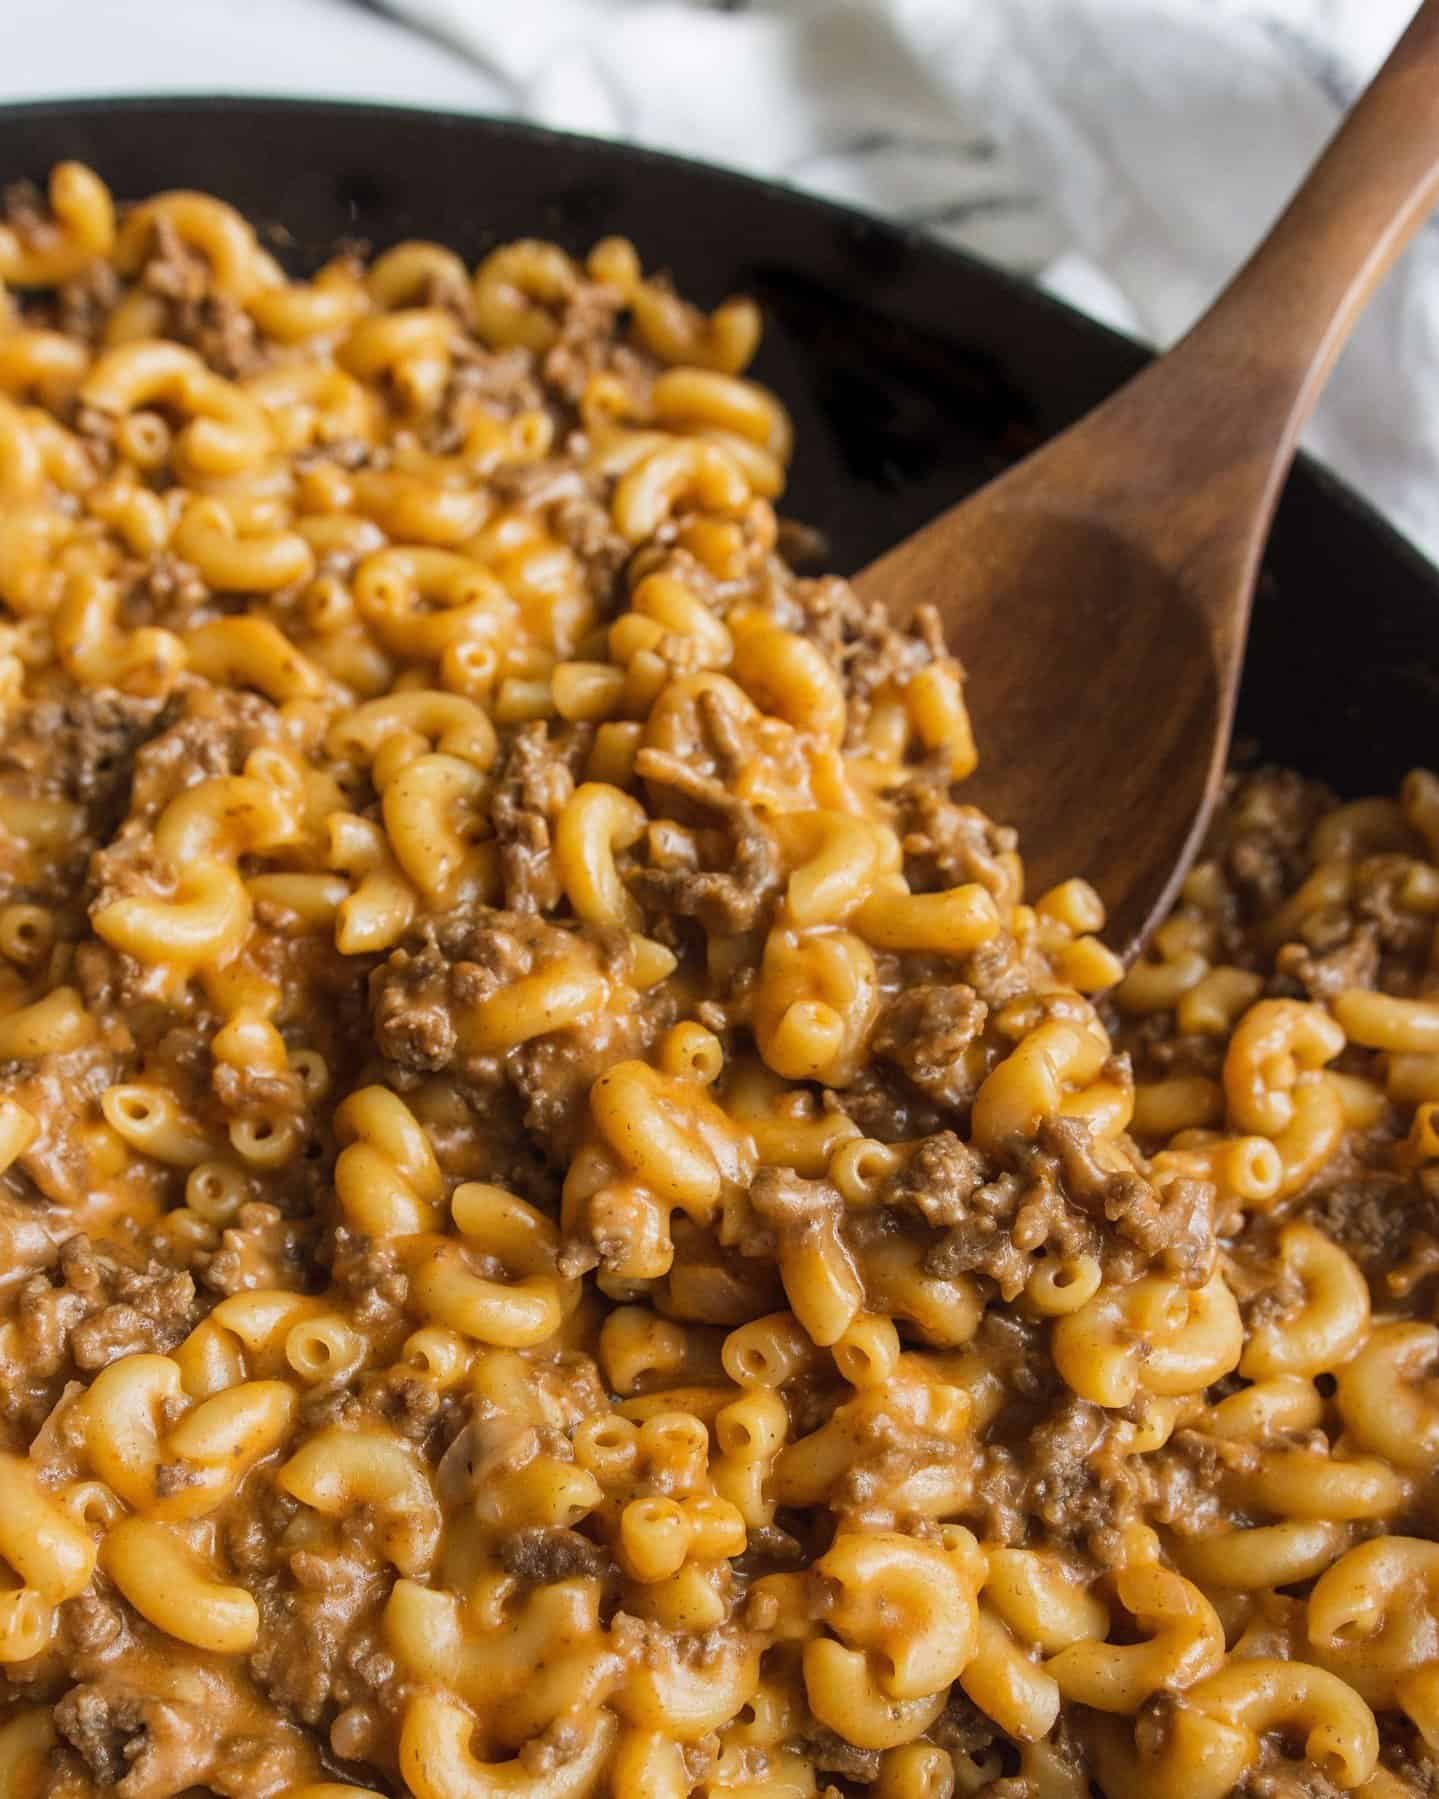 Easy Homemade Hamburger Helper is ready in 35 minutes. This copycat version is so good and can still be made in one skillet!⁣
⁣
Recipe in the bio! 🍔⁣
⁣
 #easyrecipes #food52 #thekitchn #buzzfeedfood #feedfeed #bhgfood #todayfood #quickdinner #dinnerideas #dinnerrecipes #hamburger #hamburgerhelper #pasta #easyrecipe #onepot